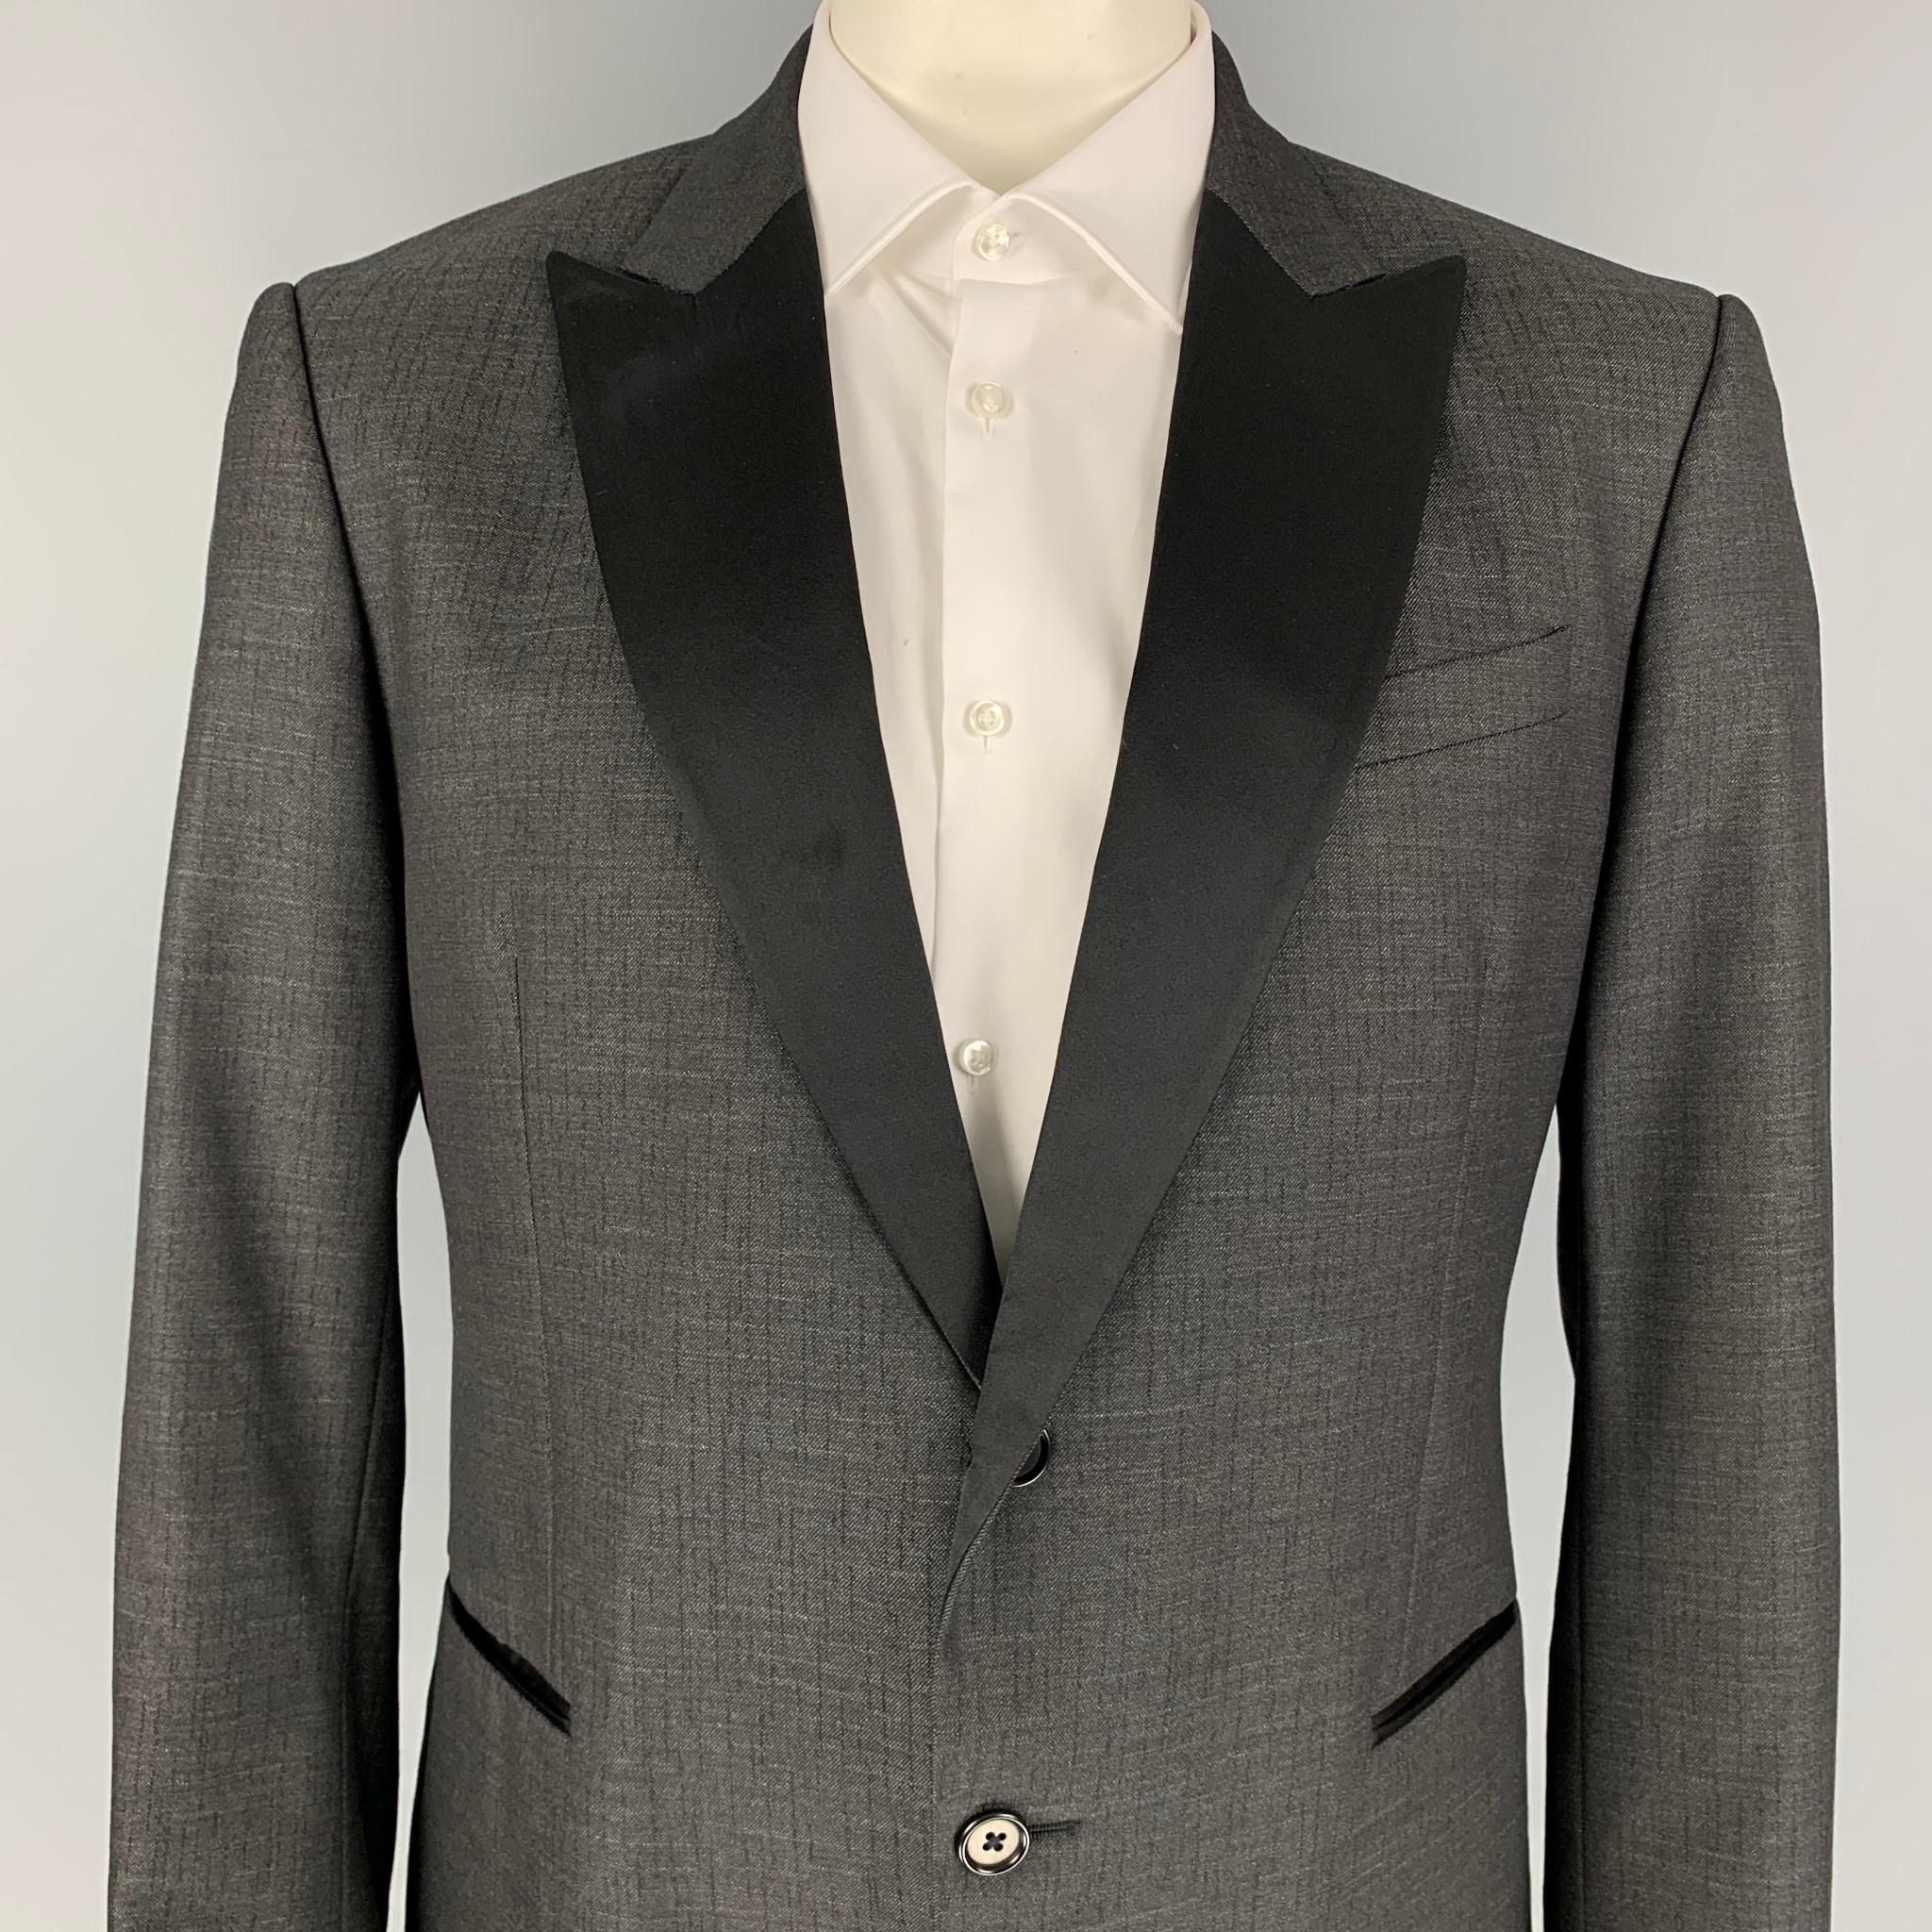 JOHN VARVATOS sport coat comes in a dark gray wool / silk with a full liner featuring a peak lapel, slit pockets, double back vent, and a two button closure. Made in Italy. 

Very Good Pre-Owned Condition.
Marked: 56

Measurements:

Shoulder: 19